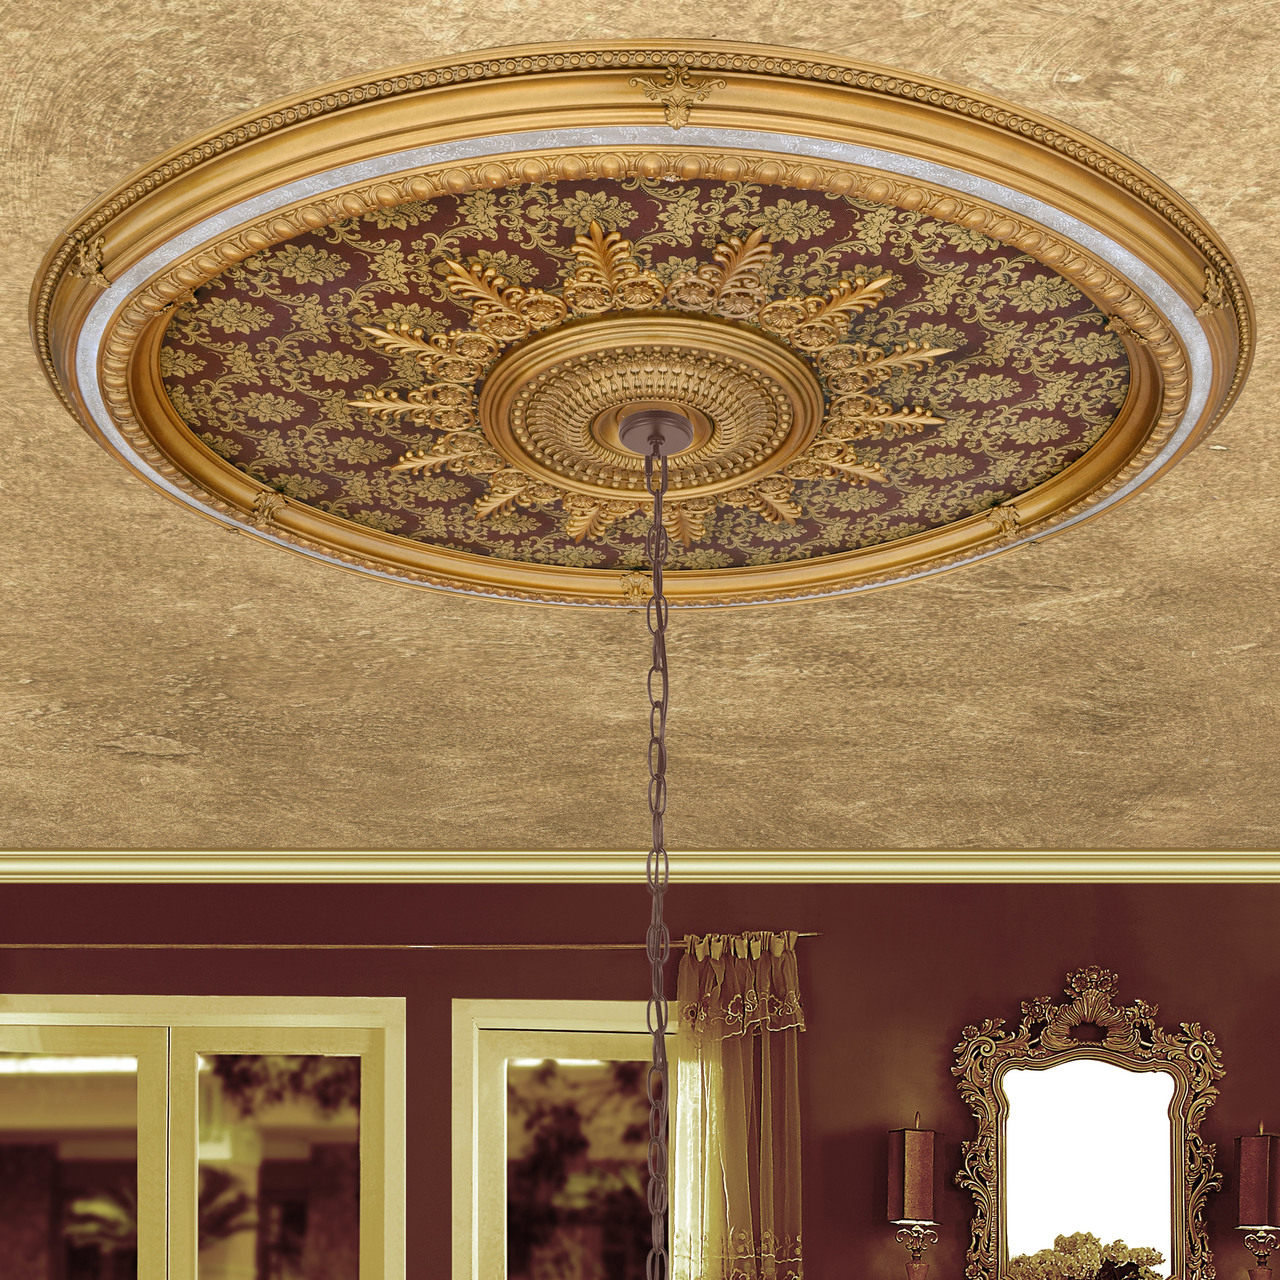 Banruo Antique Polystyrene Artistic Architectural Ceiling ...